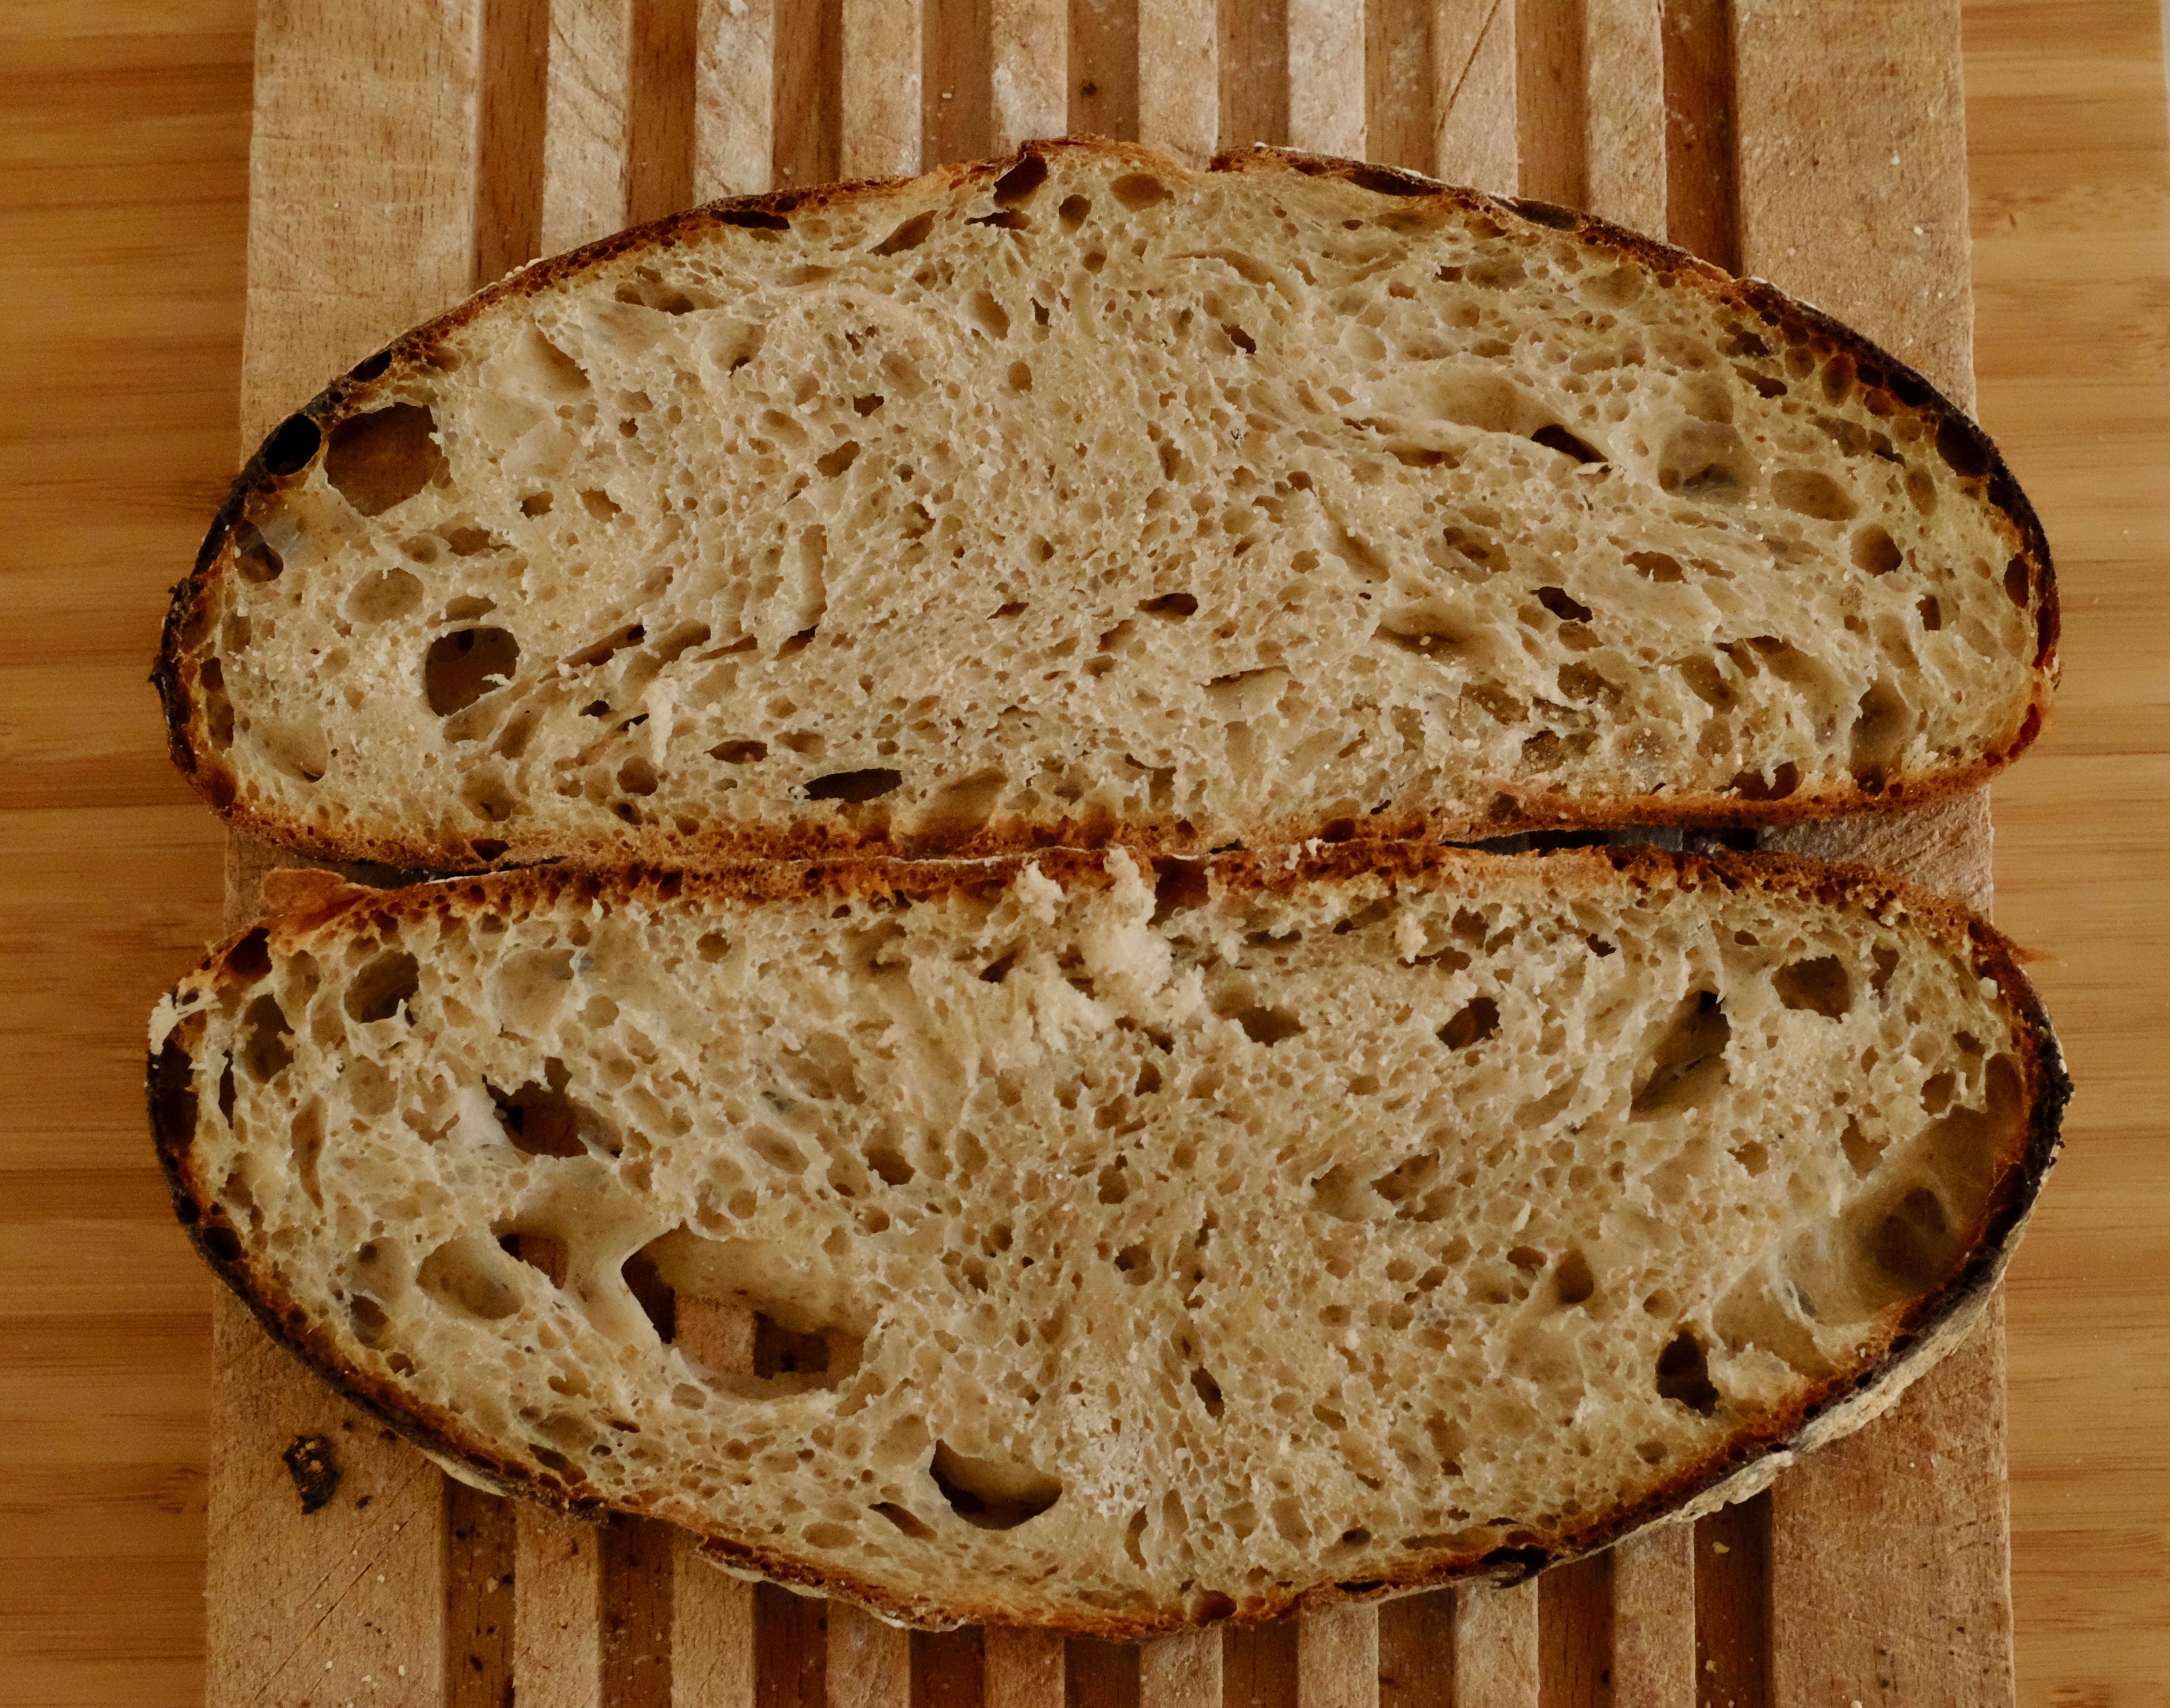 An image of a bread called “FWSY Overnight Blonde”